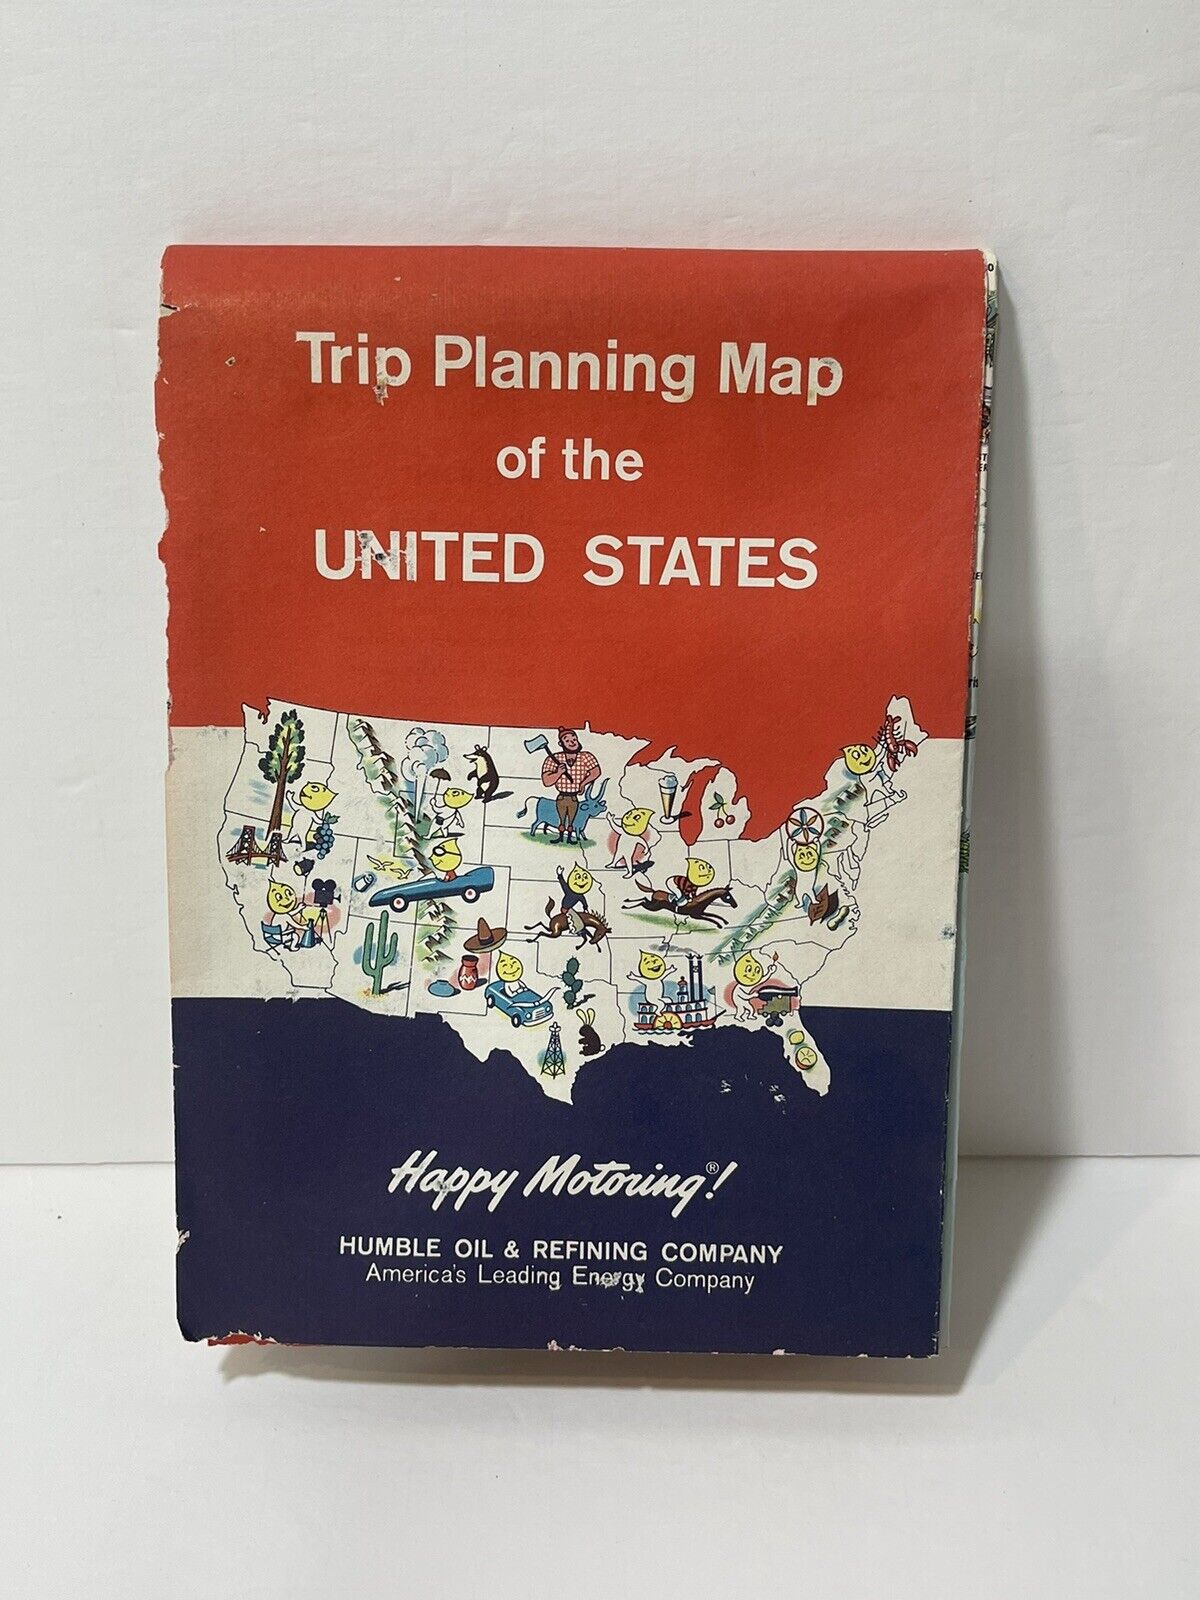 Vintage HUMBLE OIL 1962 Trip Planning Map of the  United States USED